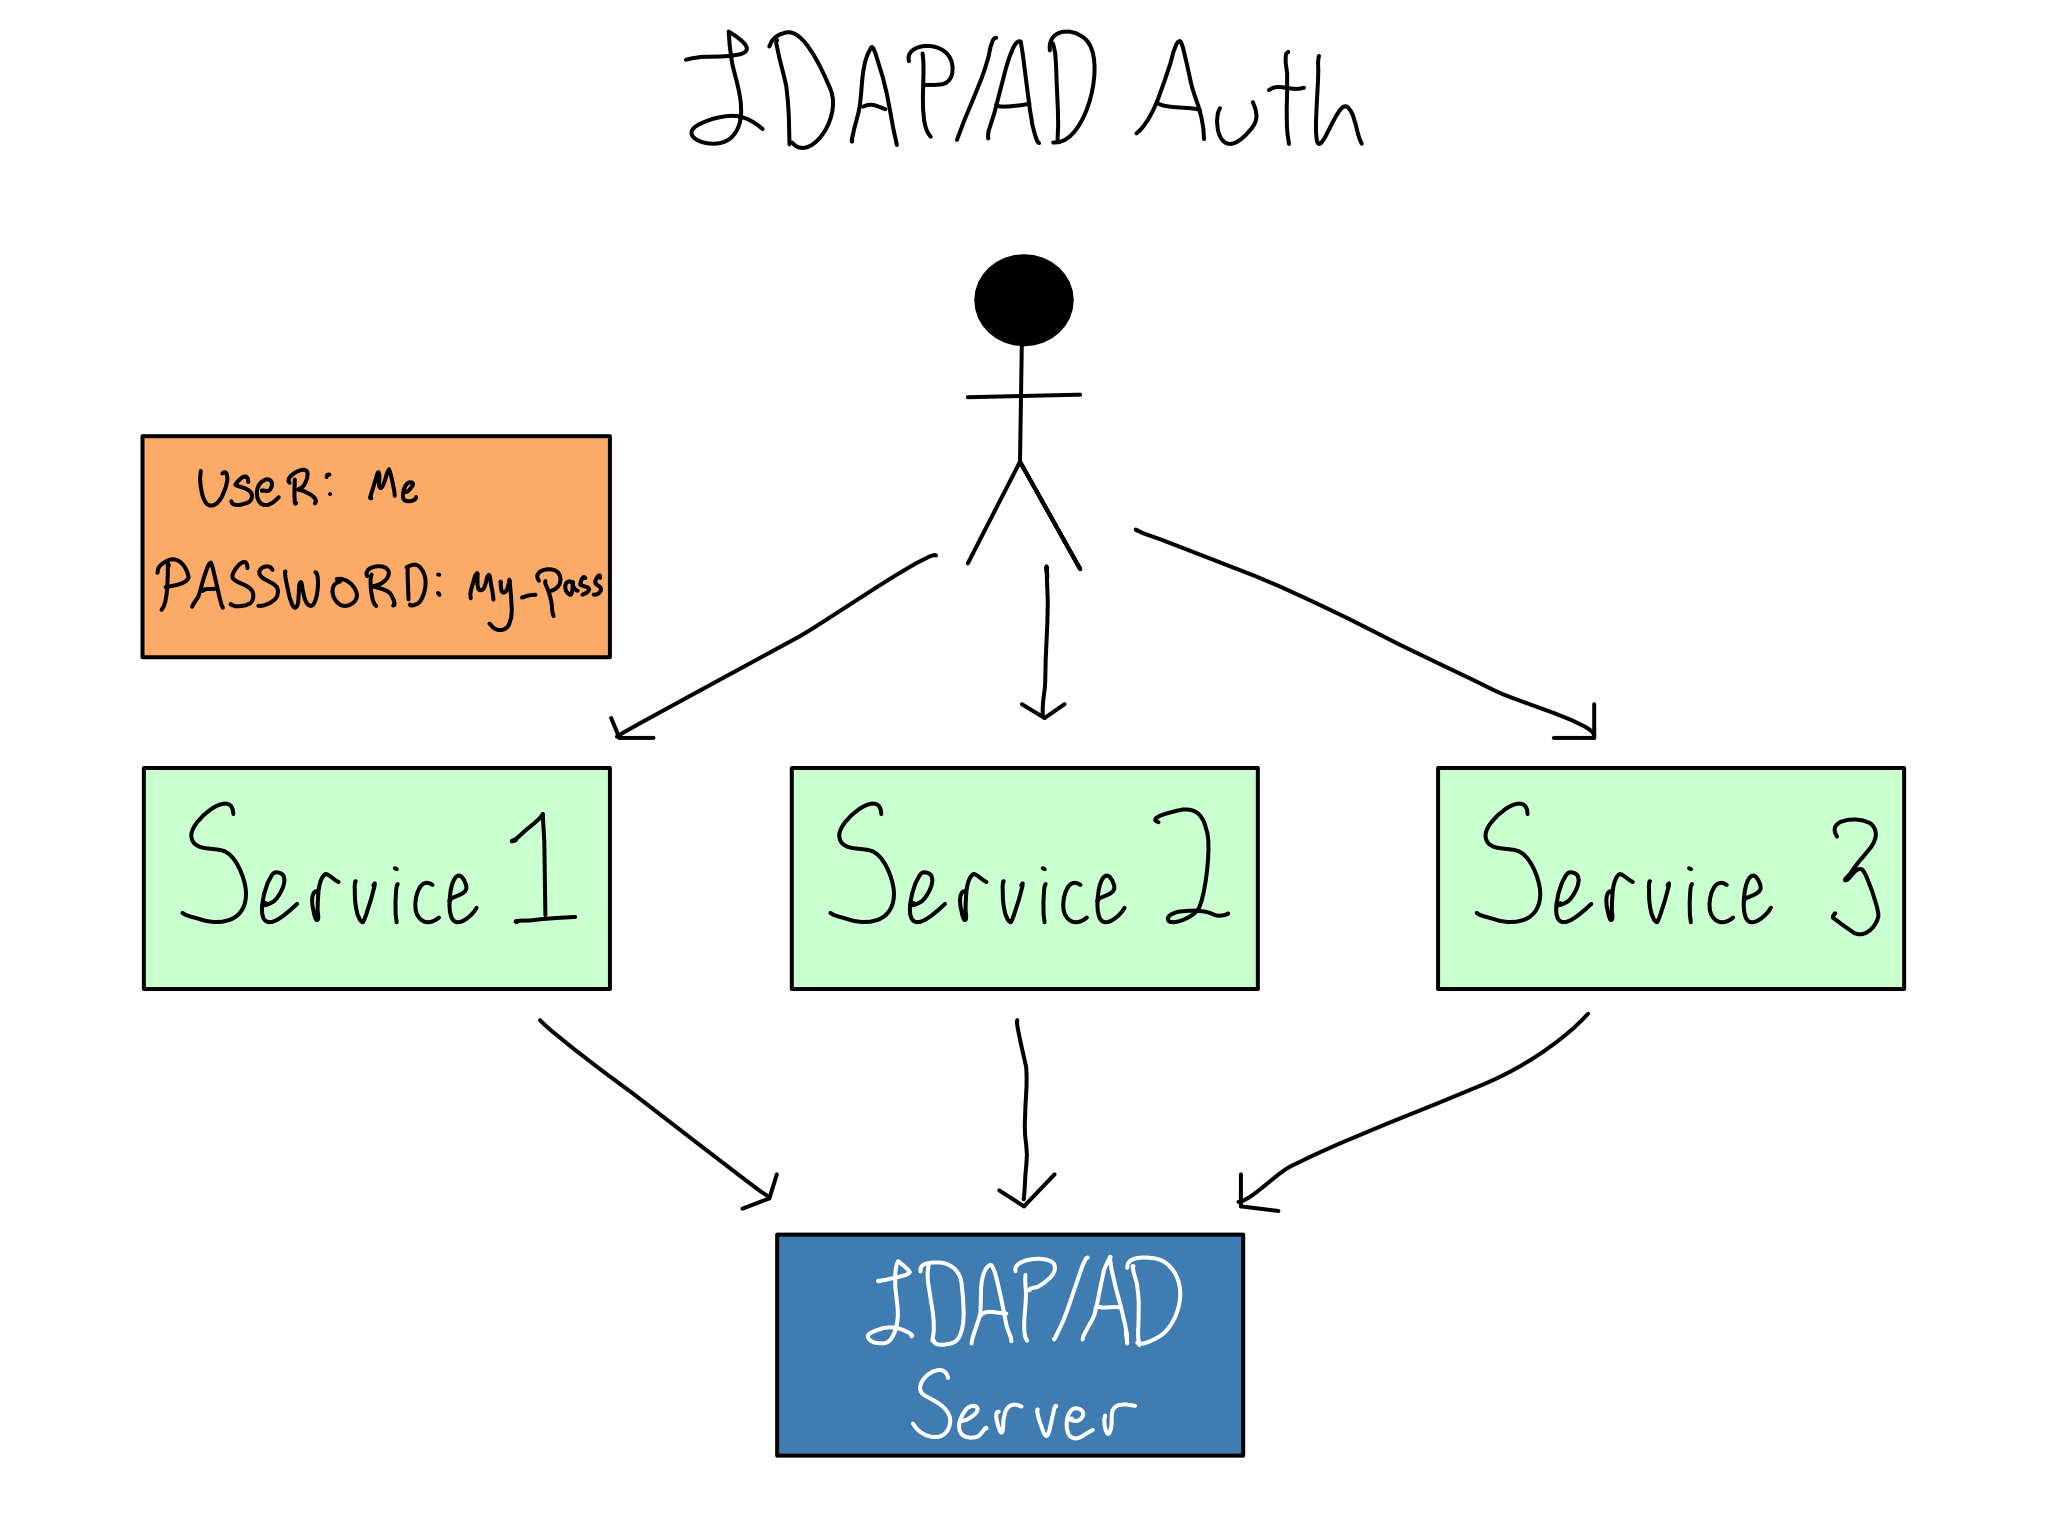 A user logging into different services with the same username and password with an LDAP/AD server in the back.